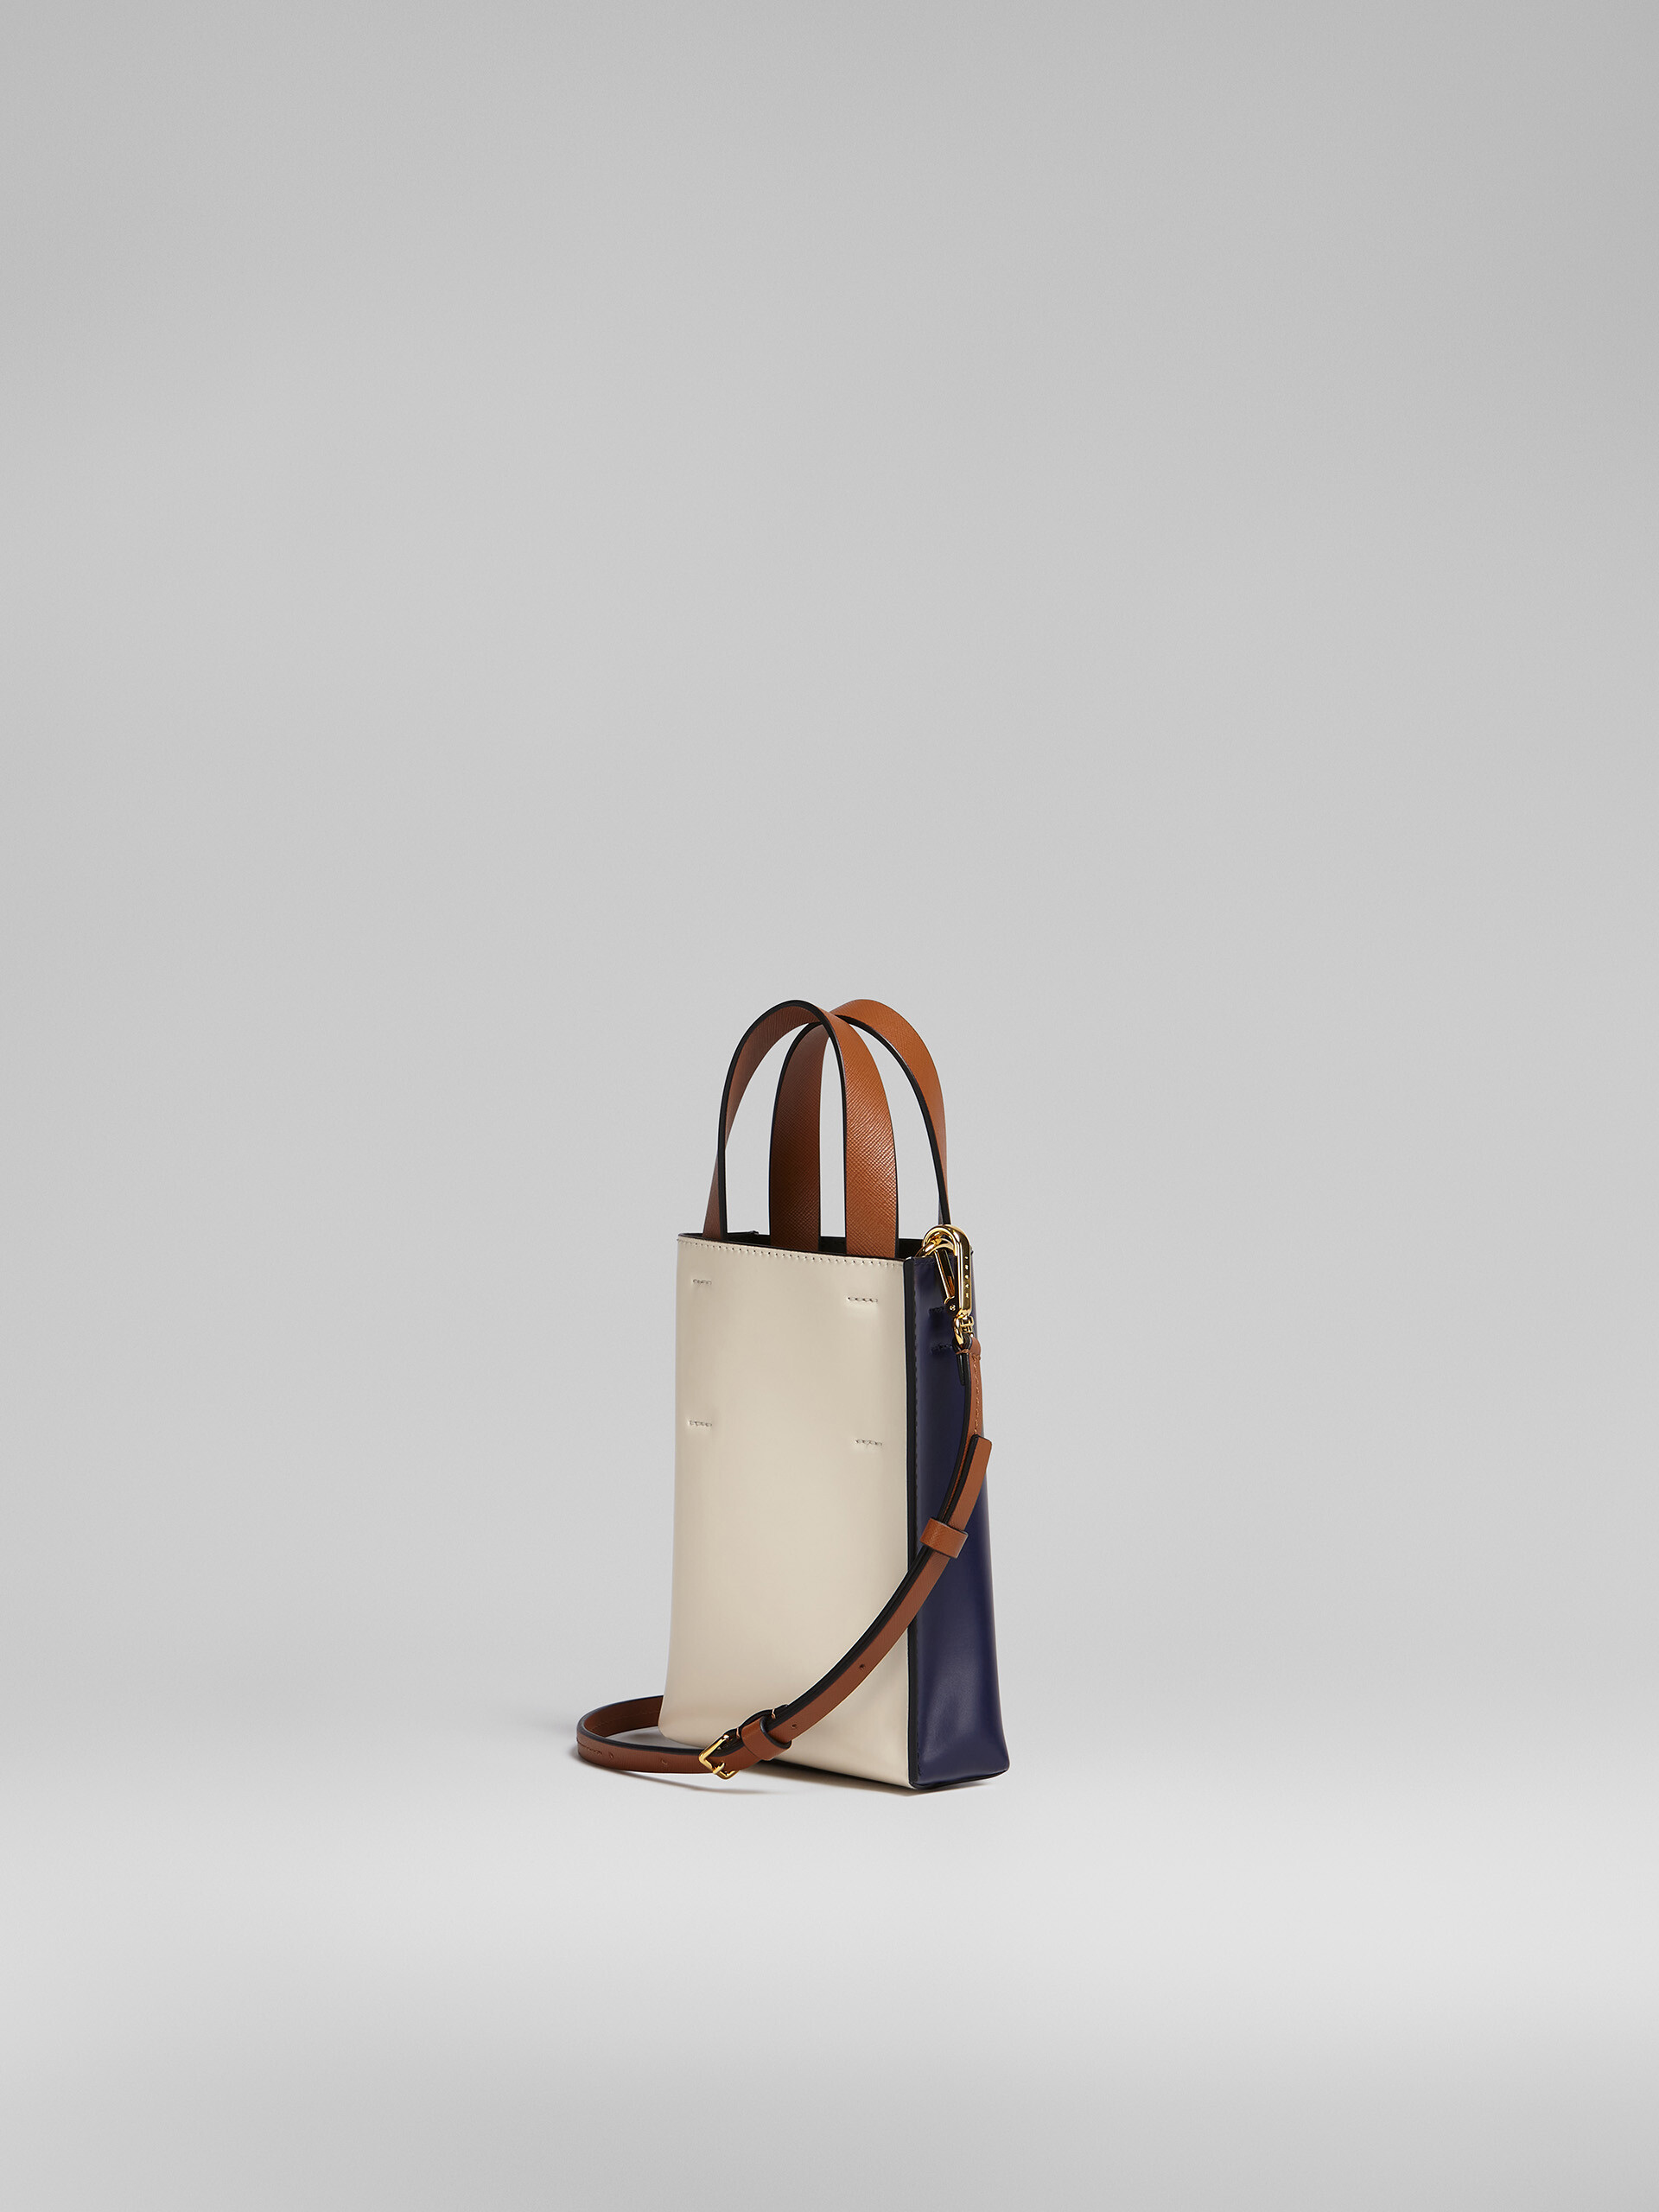 MUSEO nano bag in blue and white leather - Shopping Bags - Image 3